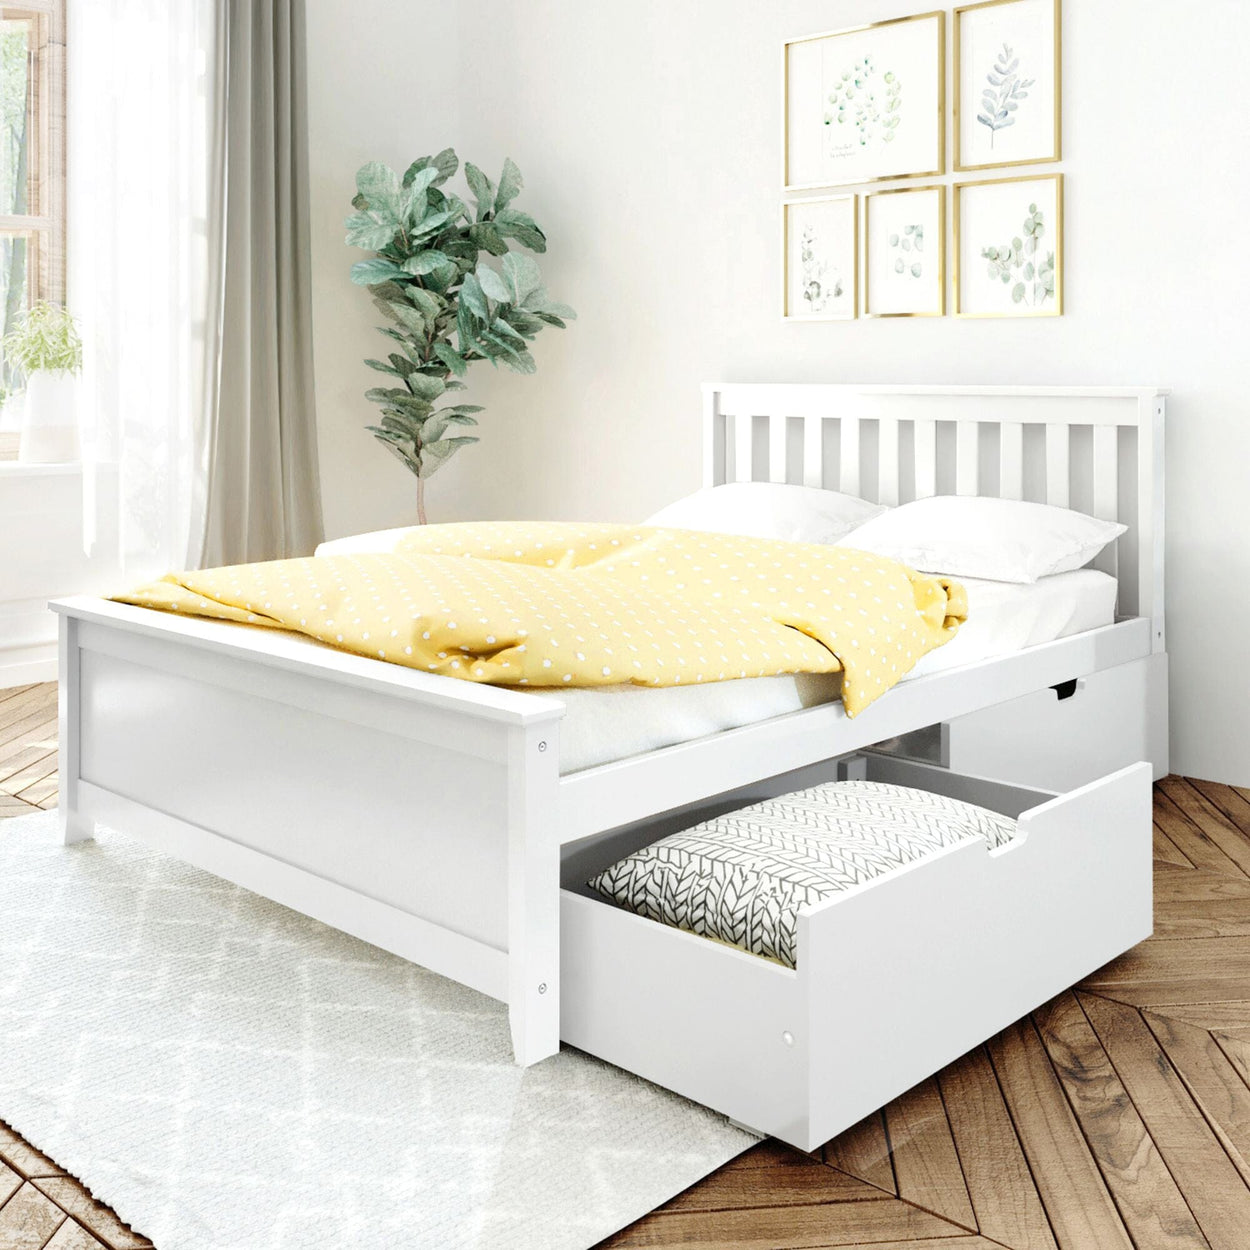 187211-002 : Kids Beds Full-Size Platform Bed with Under Bed Storage Drawers, White